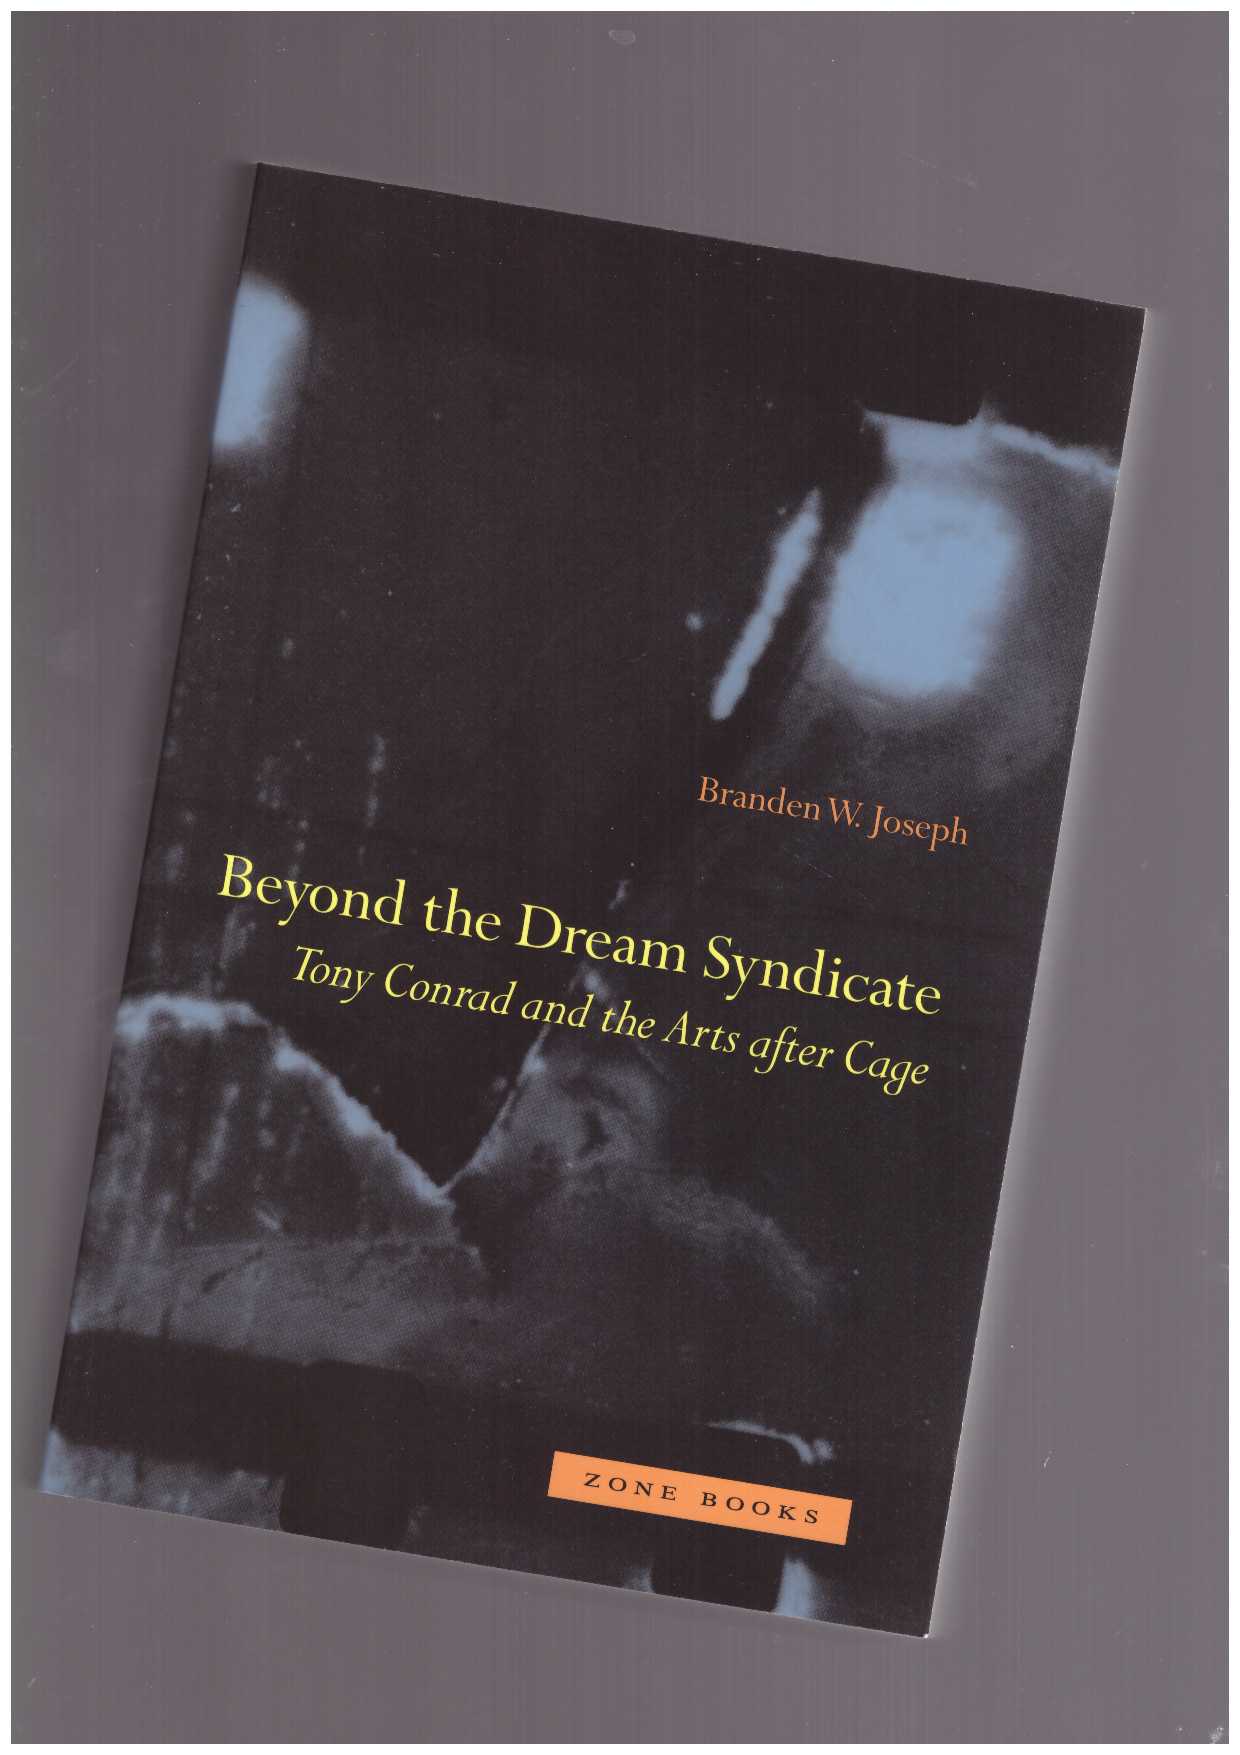 JOSEPH, Branden W. - Beyond the Dream Syndicate. Tony Conrad and the Arts after Cage